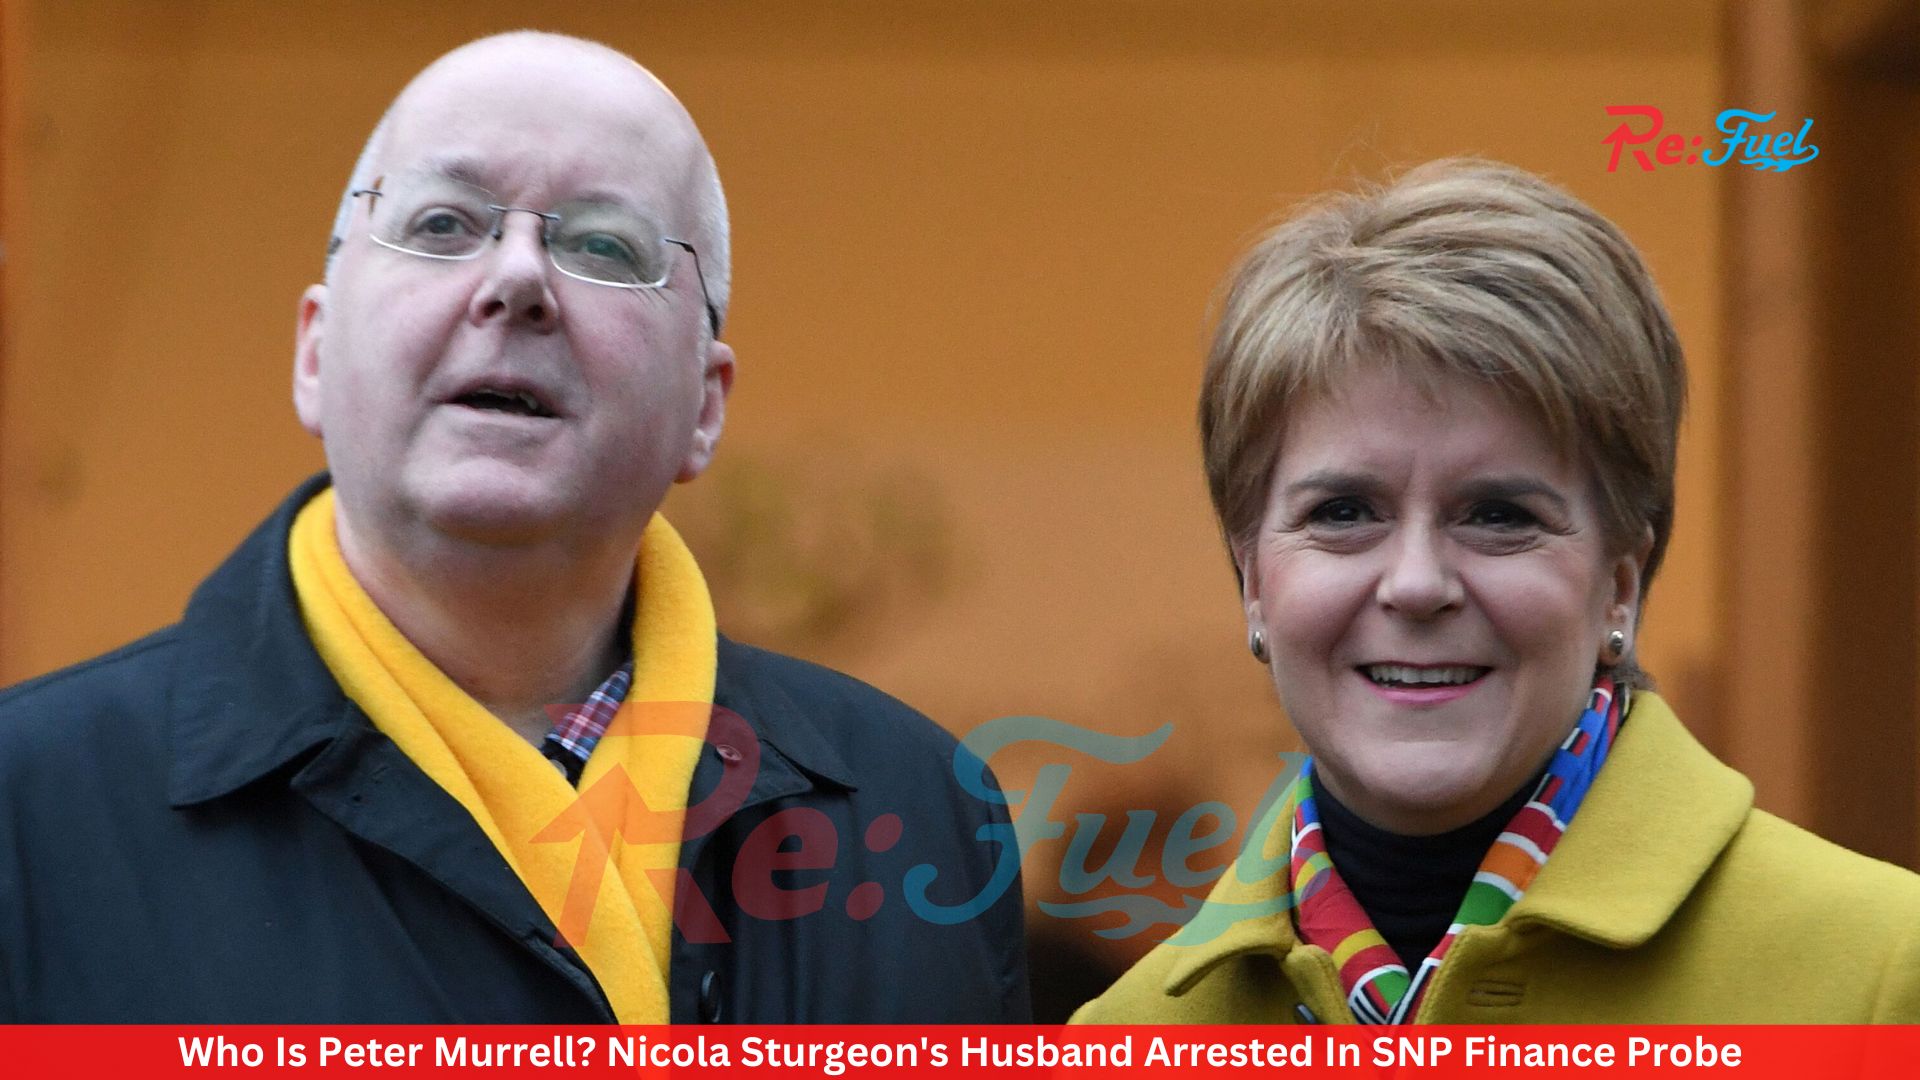 Who Is Peter Murrell? Nicola Sturgeon's Husband Arrested In SNP Finance Probe